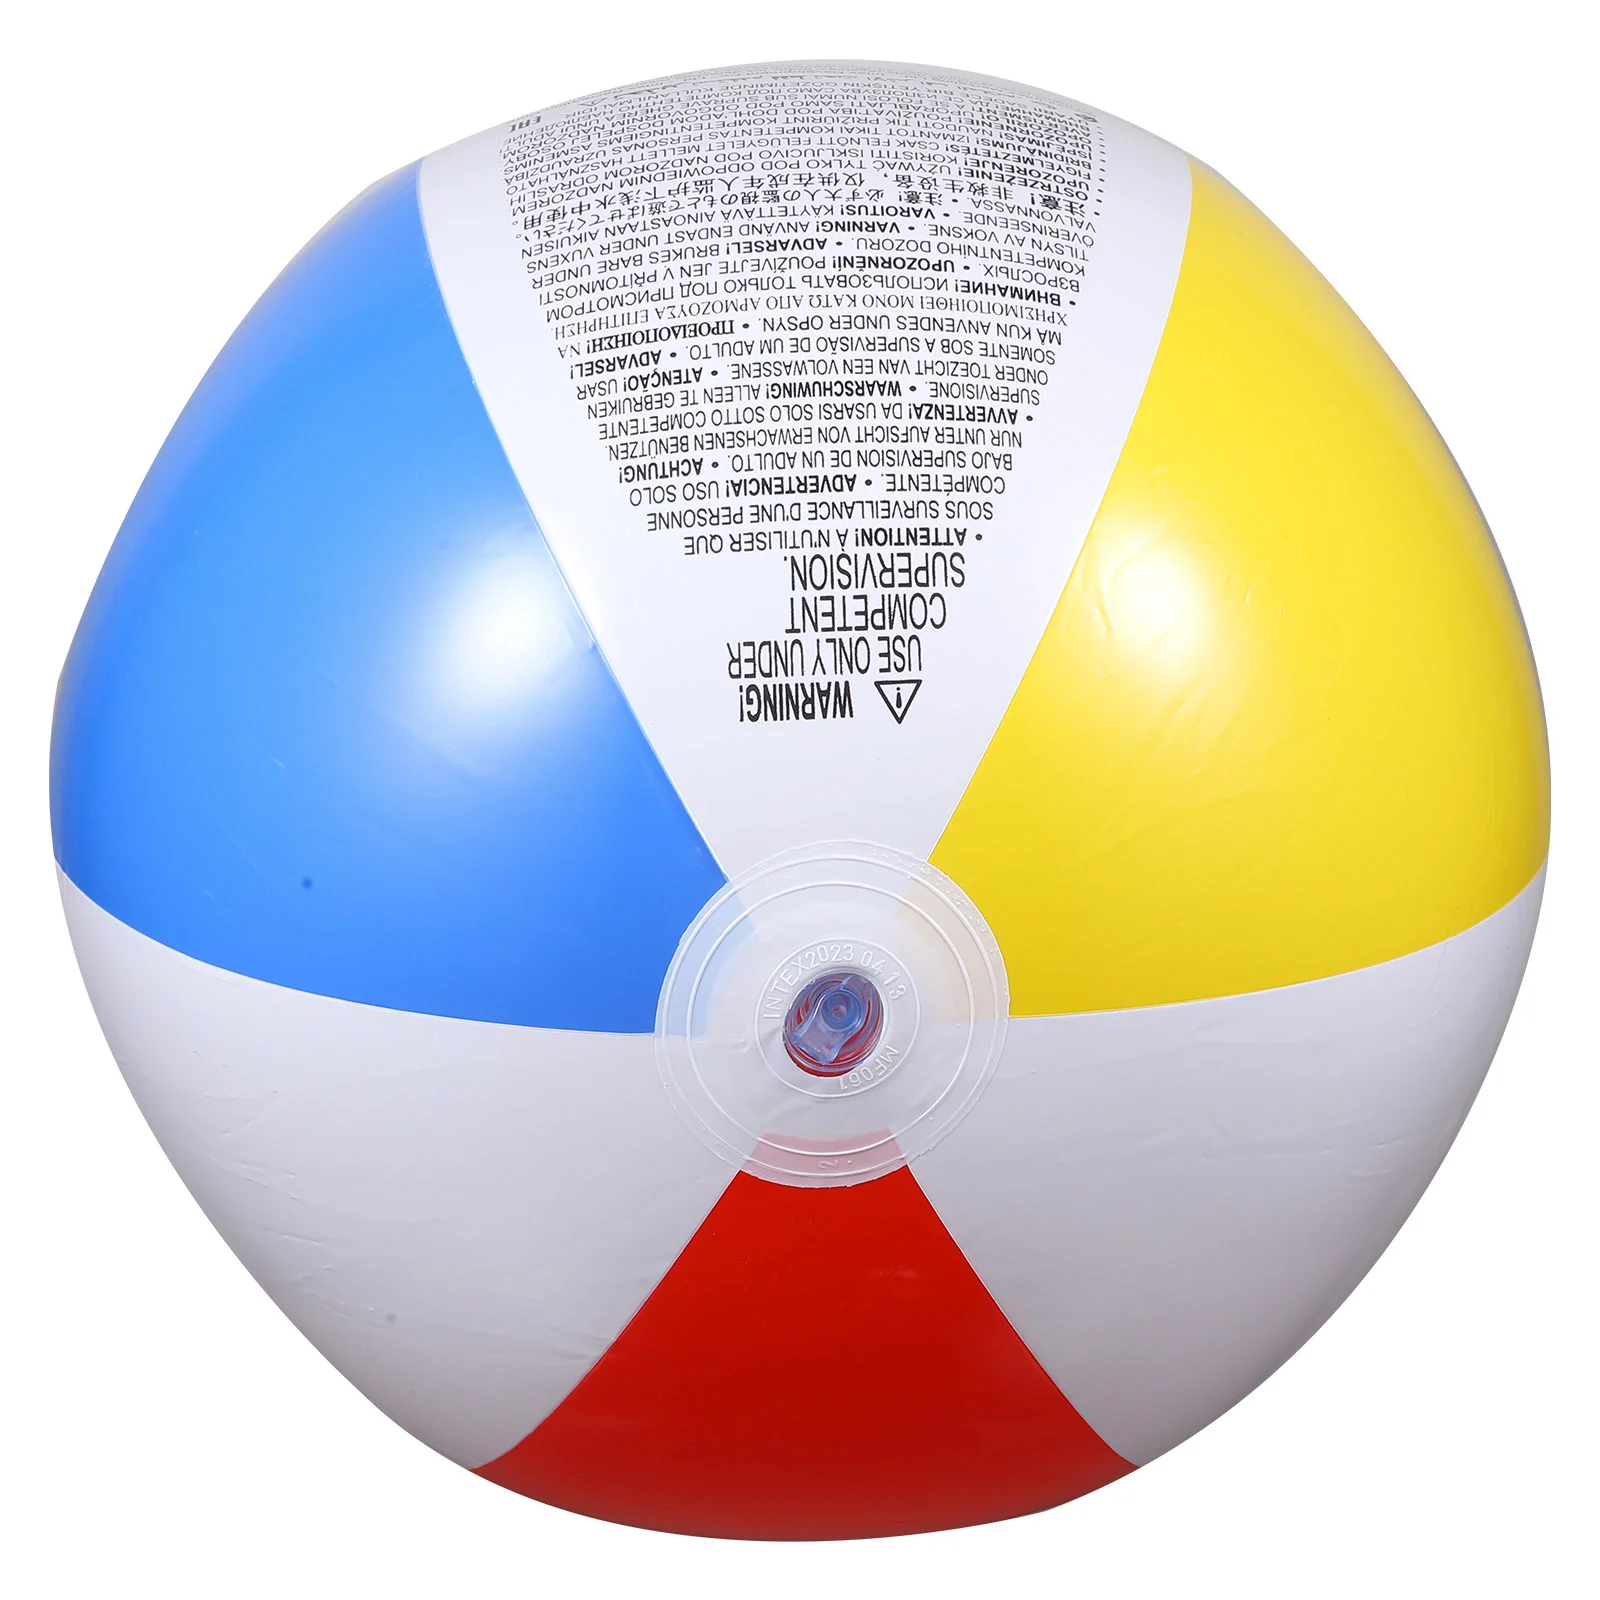 

Four-color Beach Ball Inflatable 59020 Uninflated Diameter 51cm Toy Swimming Pool Blowing up Balls Giant Pvc Outdoor Large